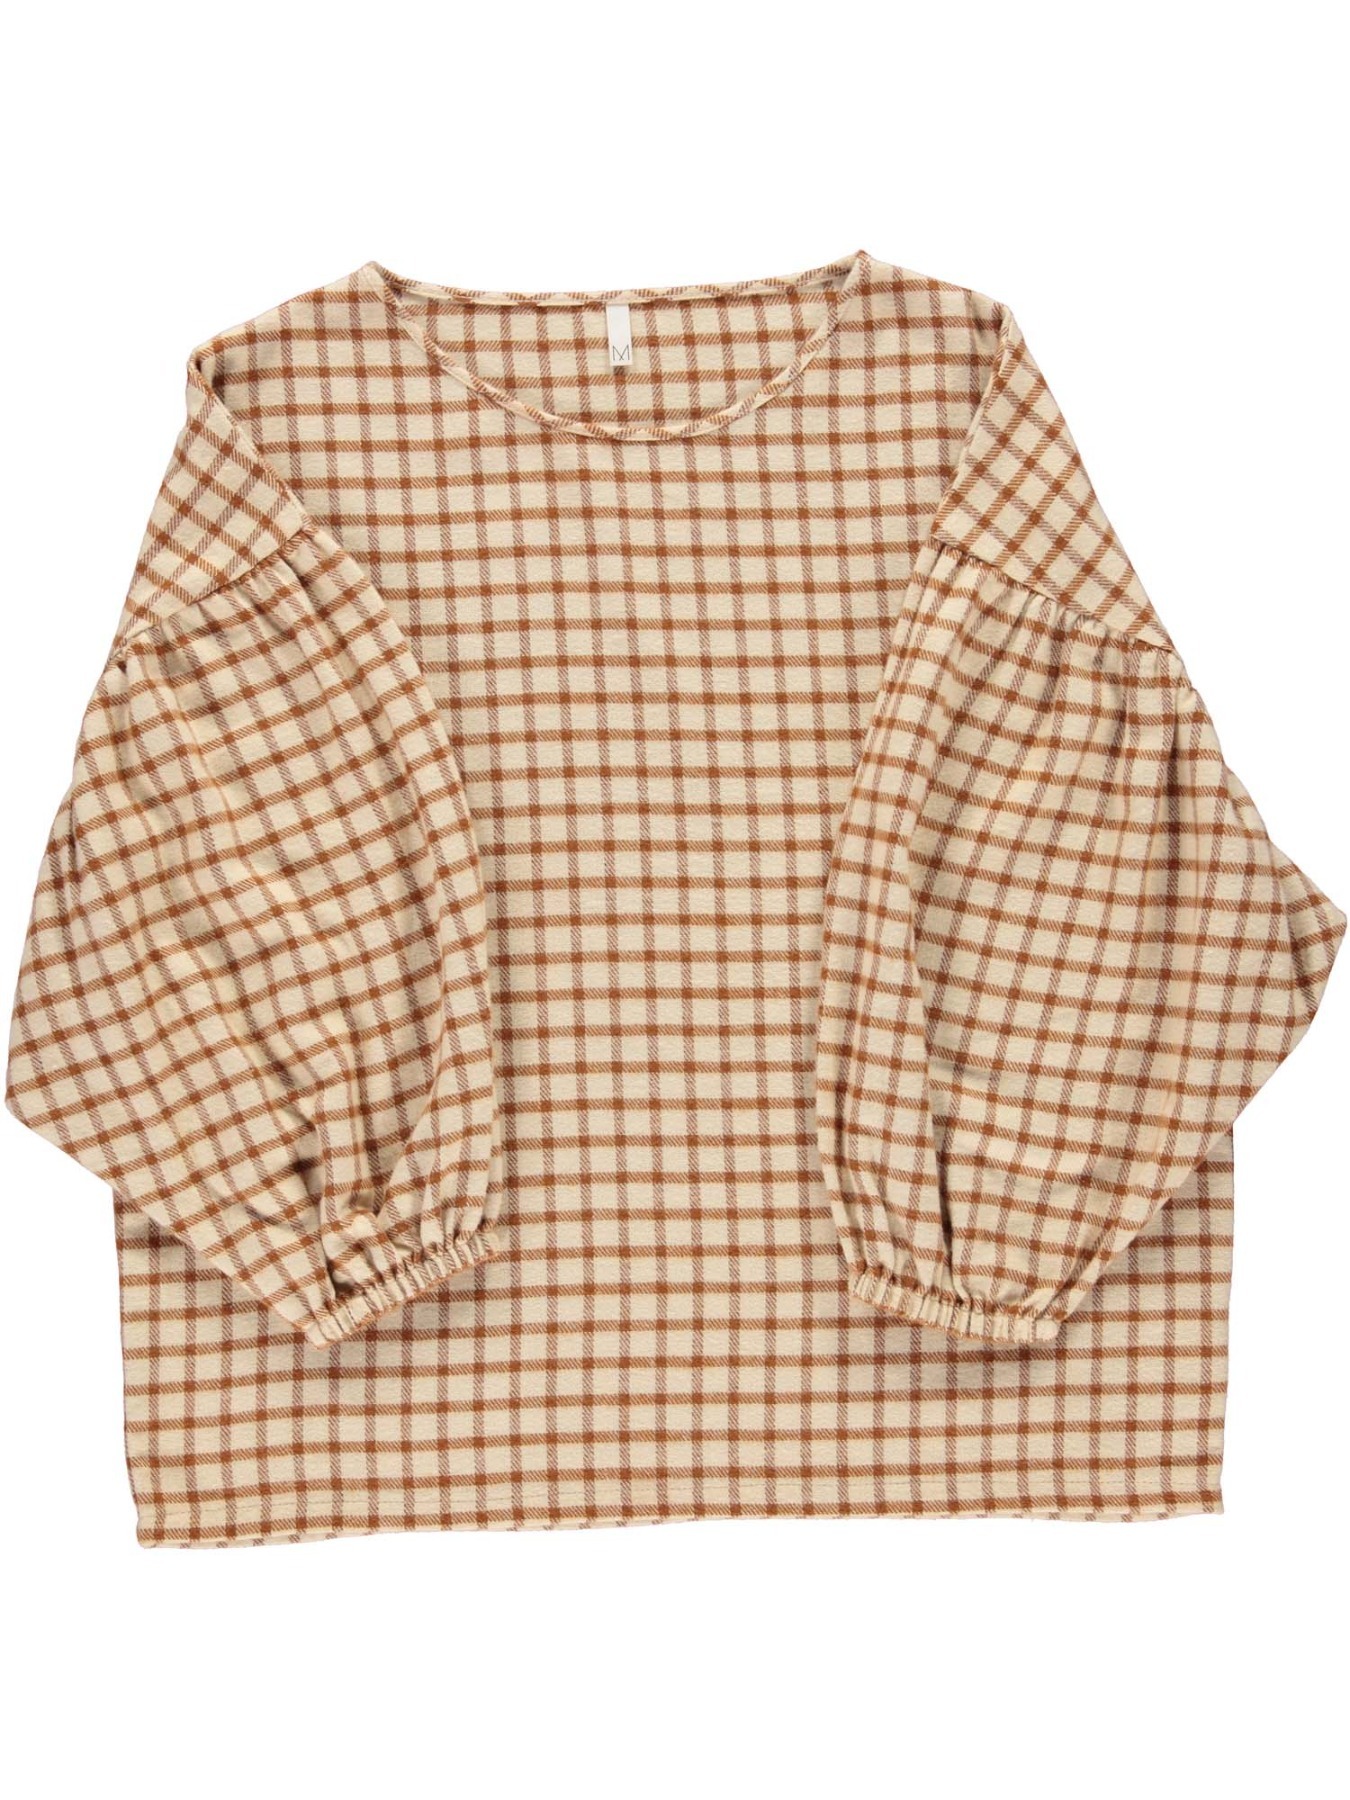 Monkind - Amber Check Puff Blouse - ADULT 3